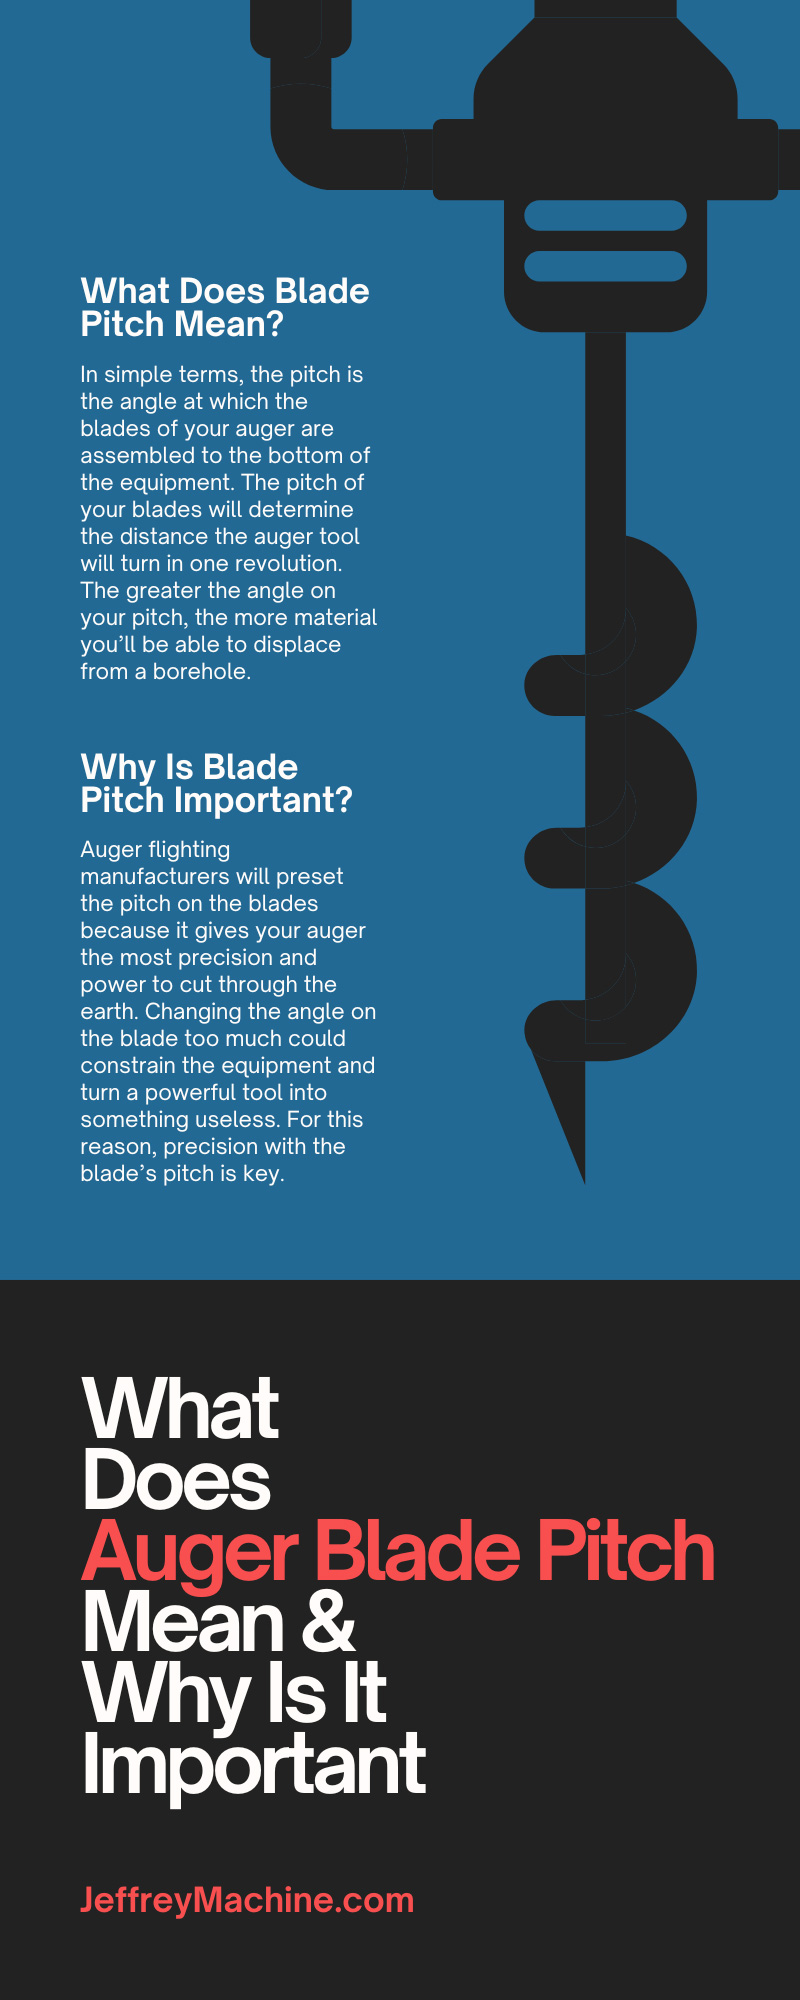 What Does Auger Blade Pitch Mean & Why Is It Important